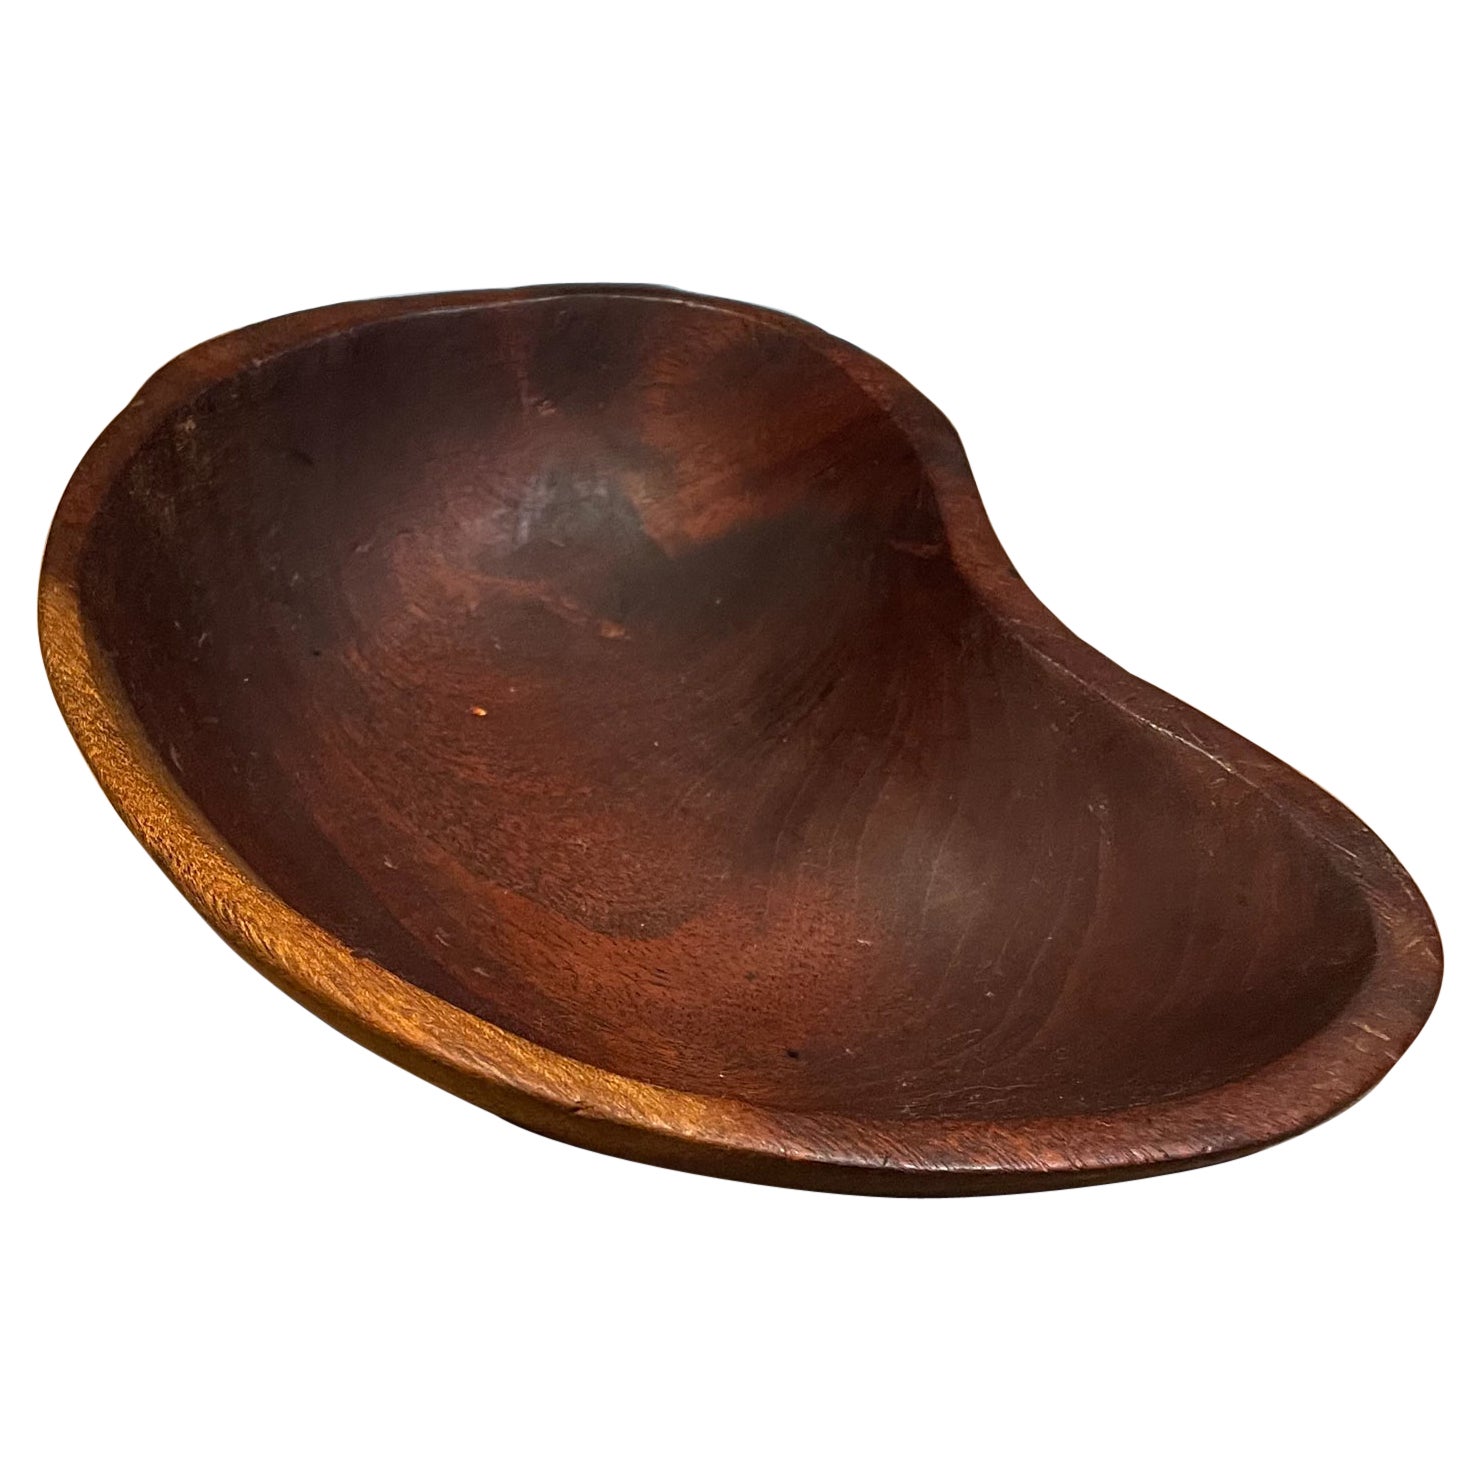 Handmade Biomorphic Wood Bowl Catch it All Modern Don Shoemaker Mexico 1970s